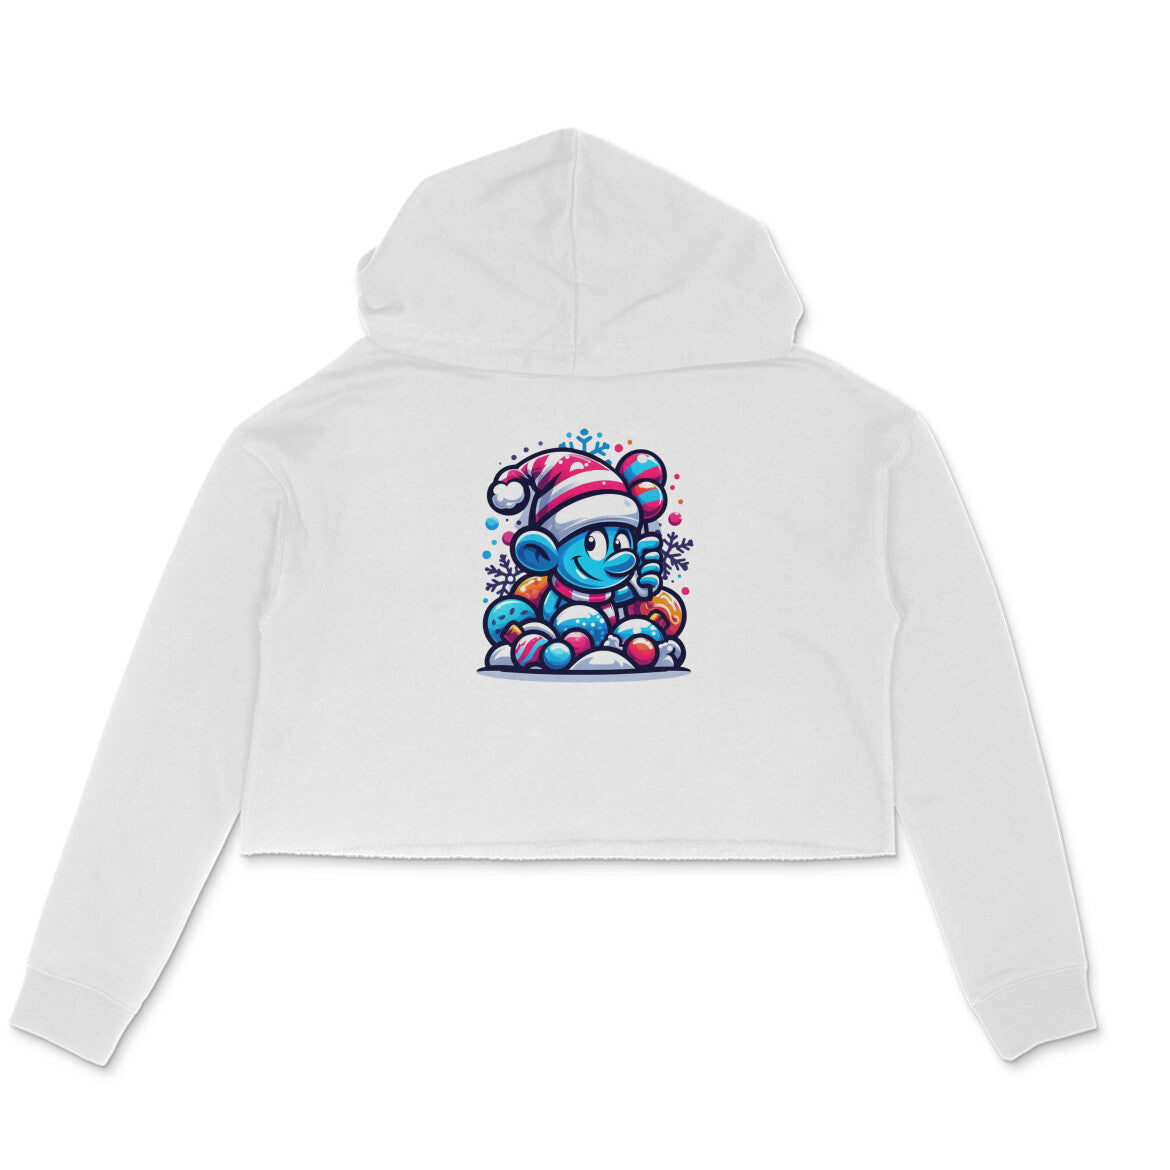 Festive Whimsy: Women's Printed Crop Hoody with Smurf in Christmas